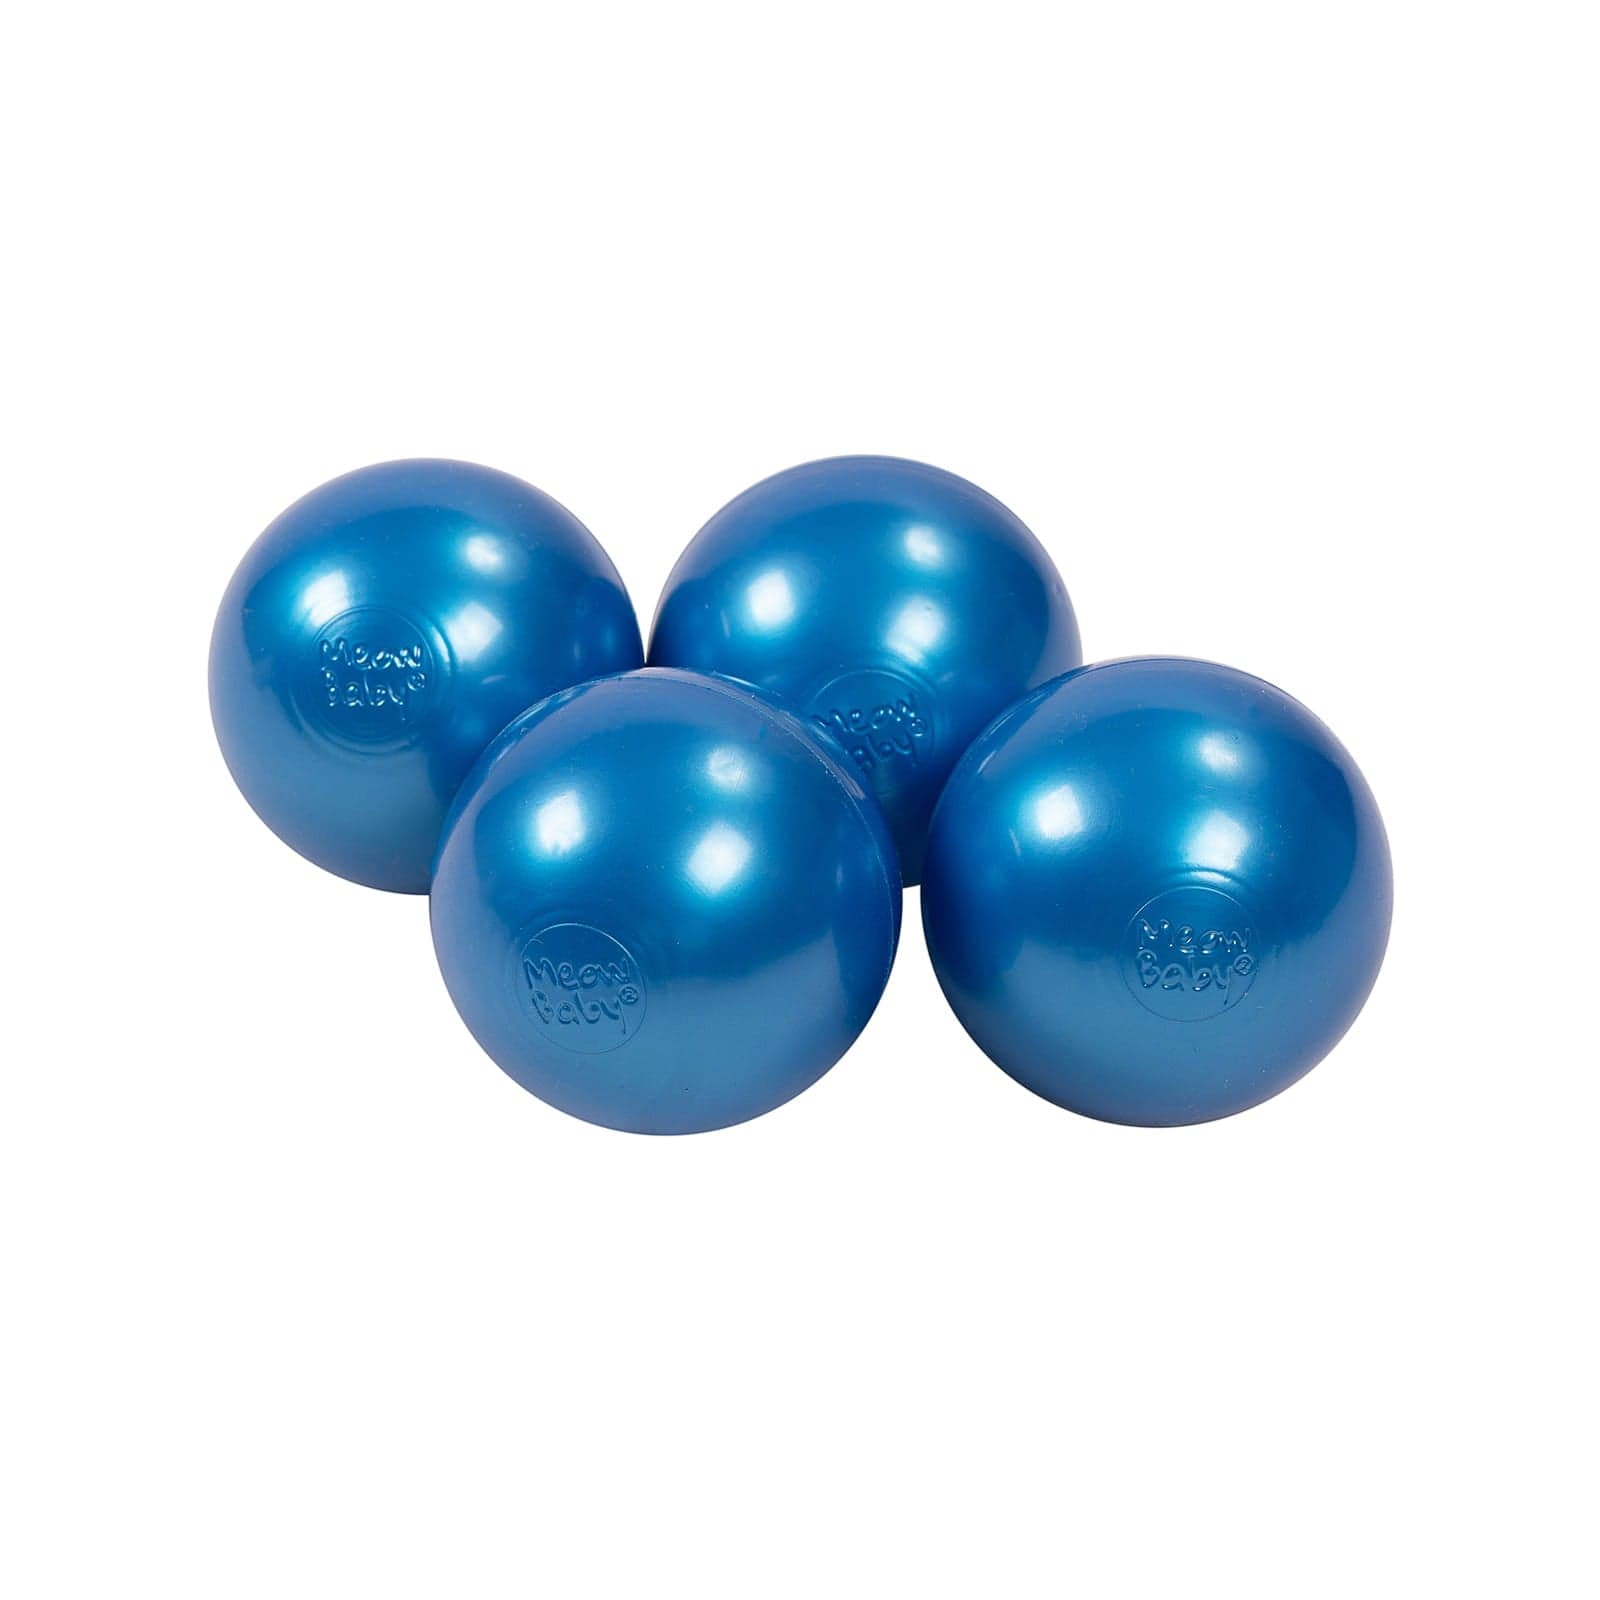 Soft CE Certified Plastic Balls For Kids By MeowBaby - Stylemykid.com